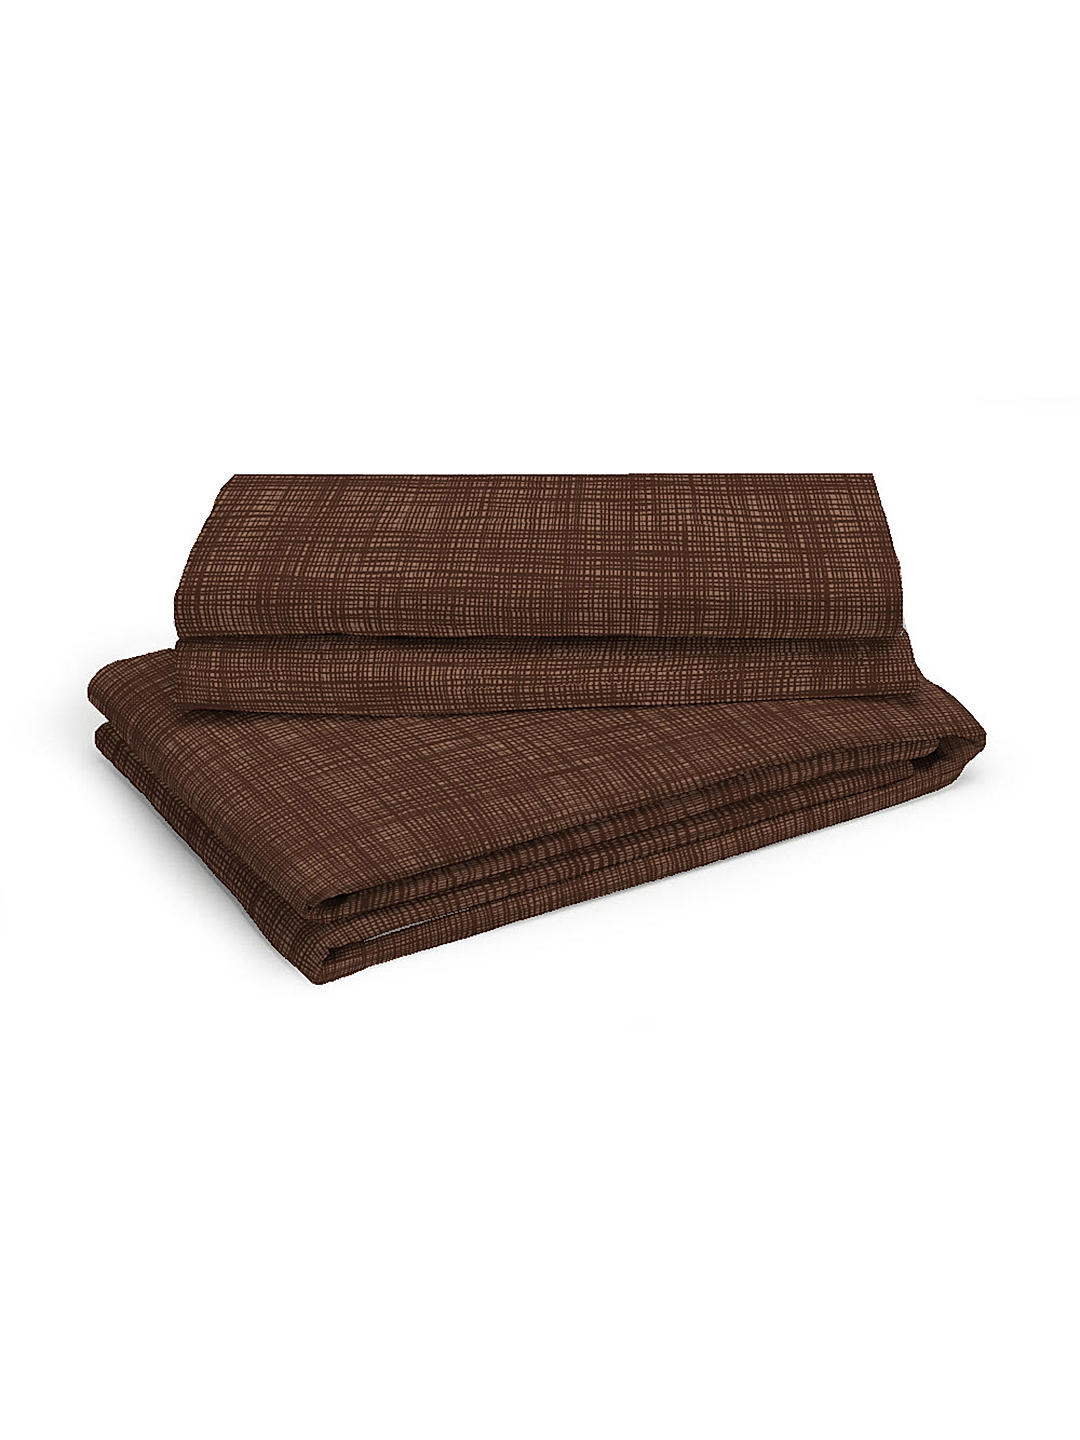 Guaze Cotton Fine Brown Colored Checkered Print King Bed Sheet Set